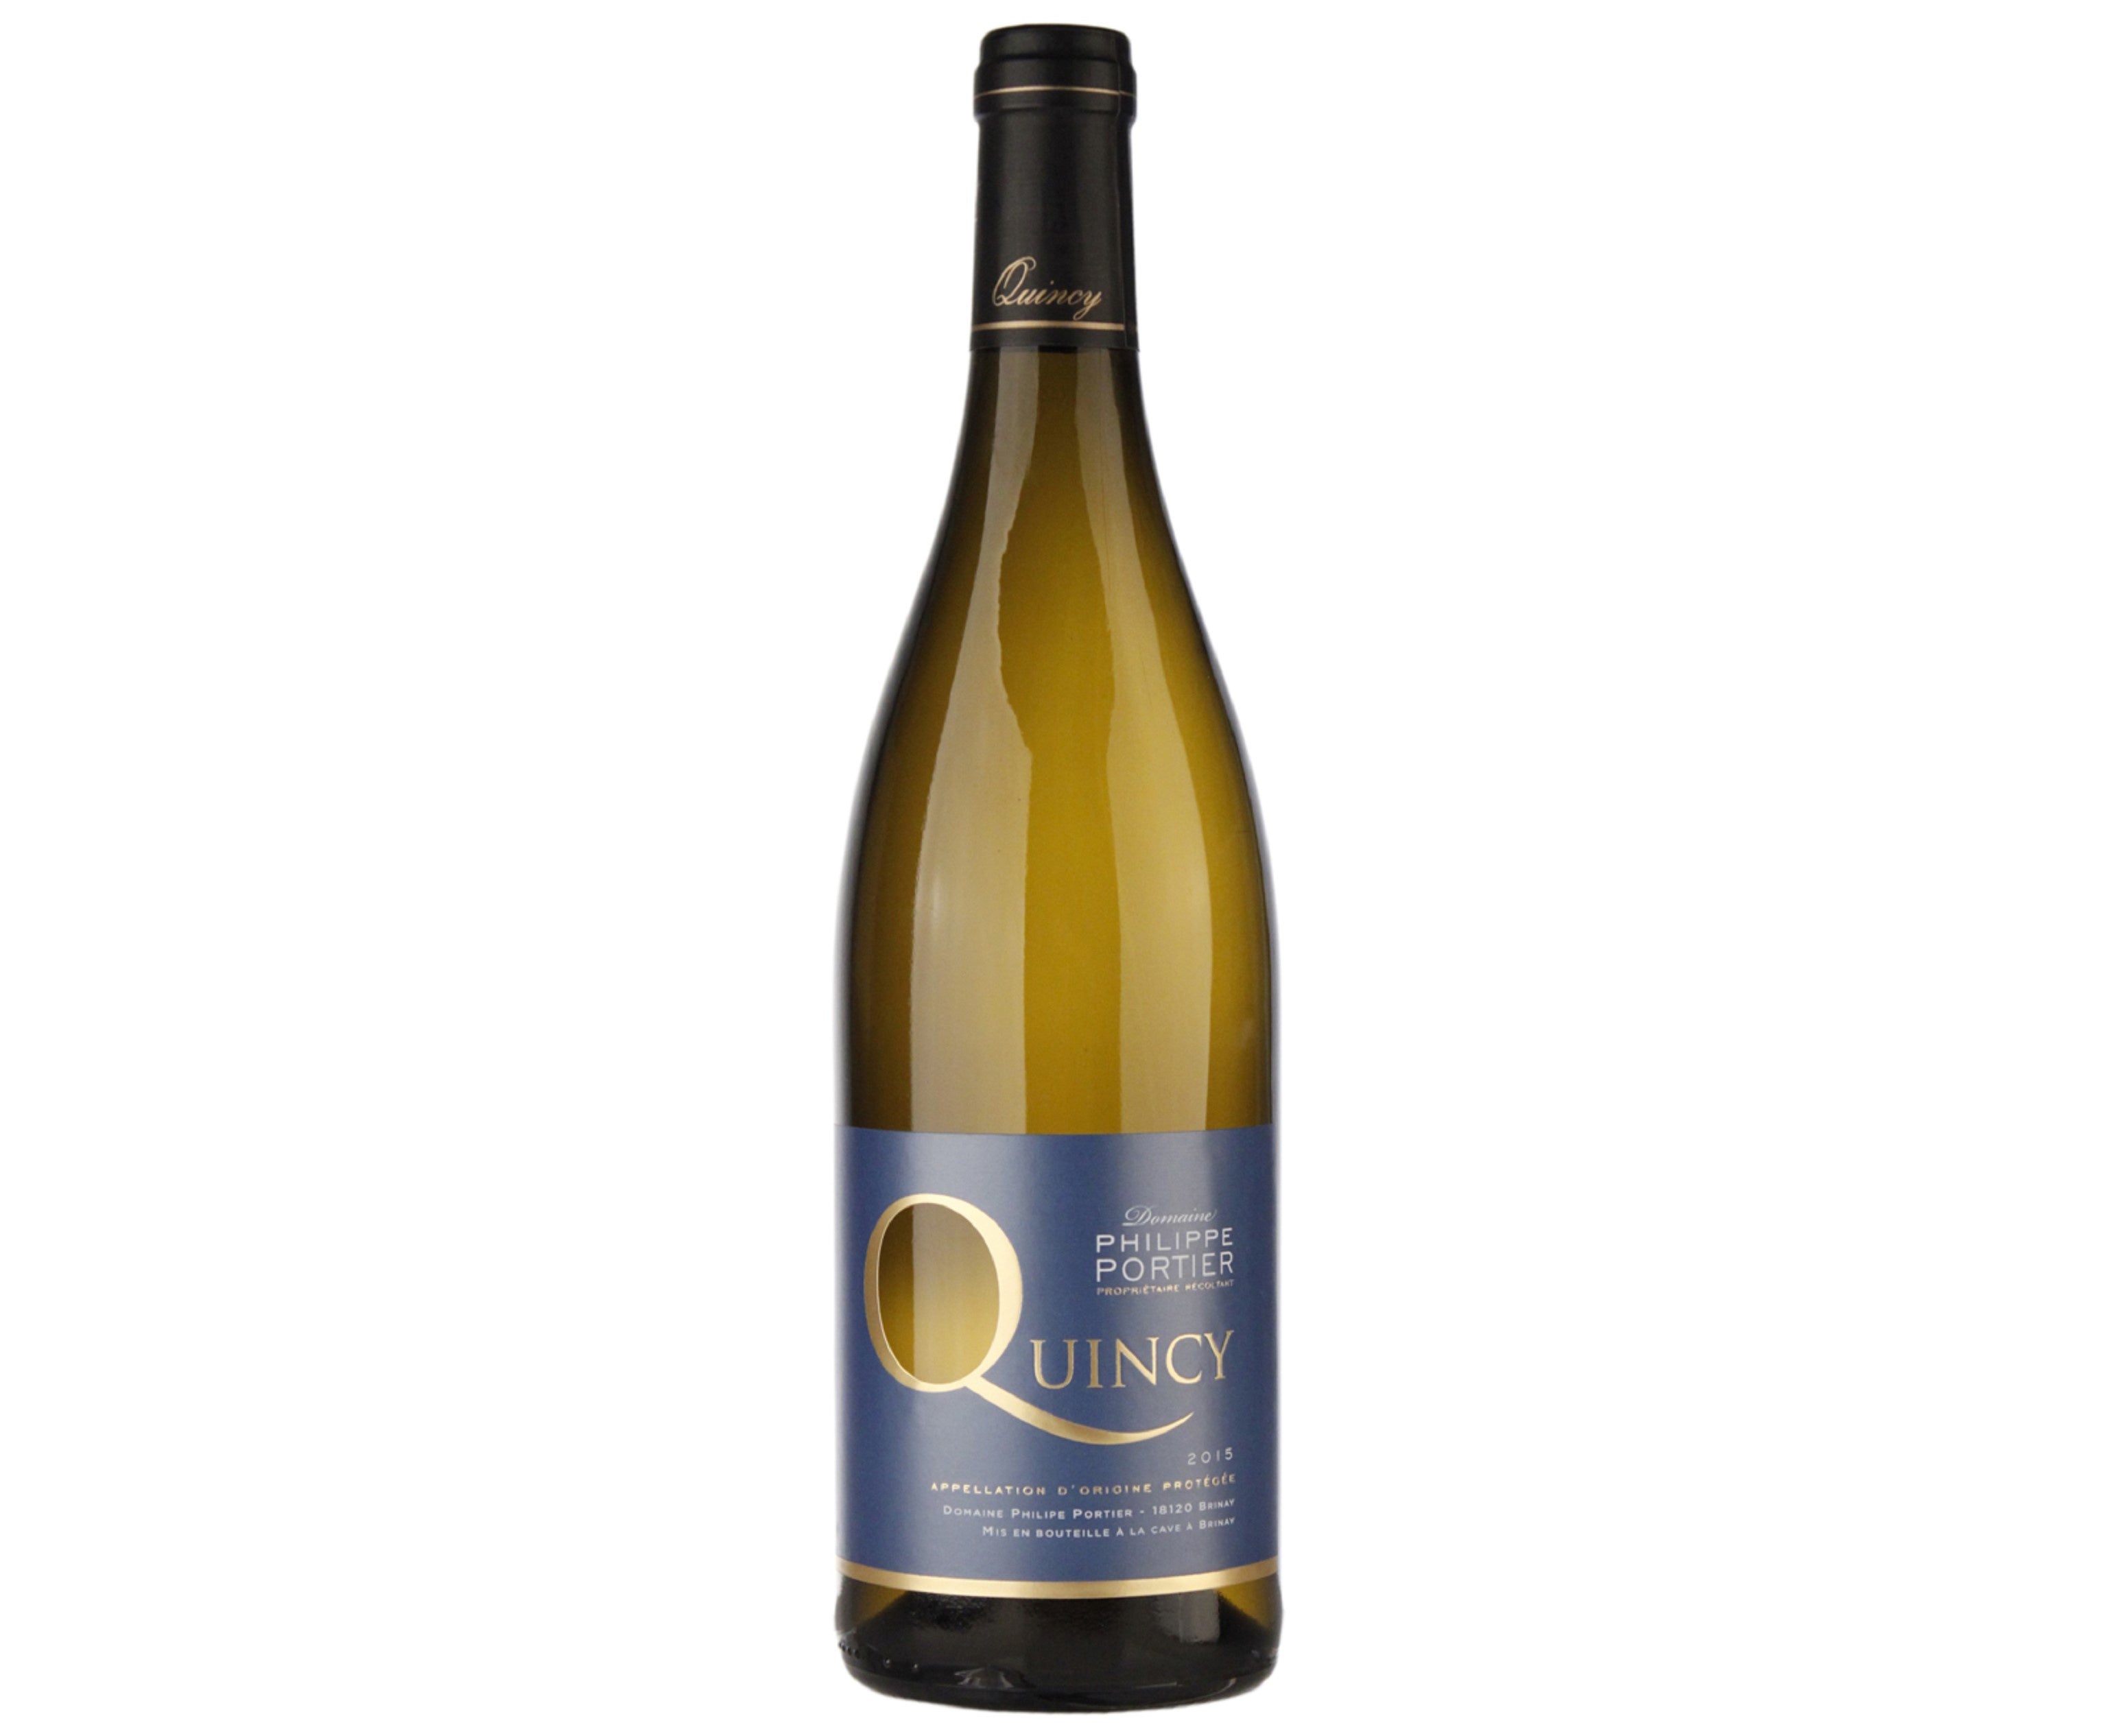 2022 Quincy, Domaine Philippe Portier, Loire Valley, France